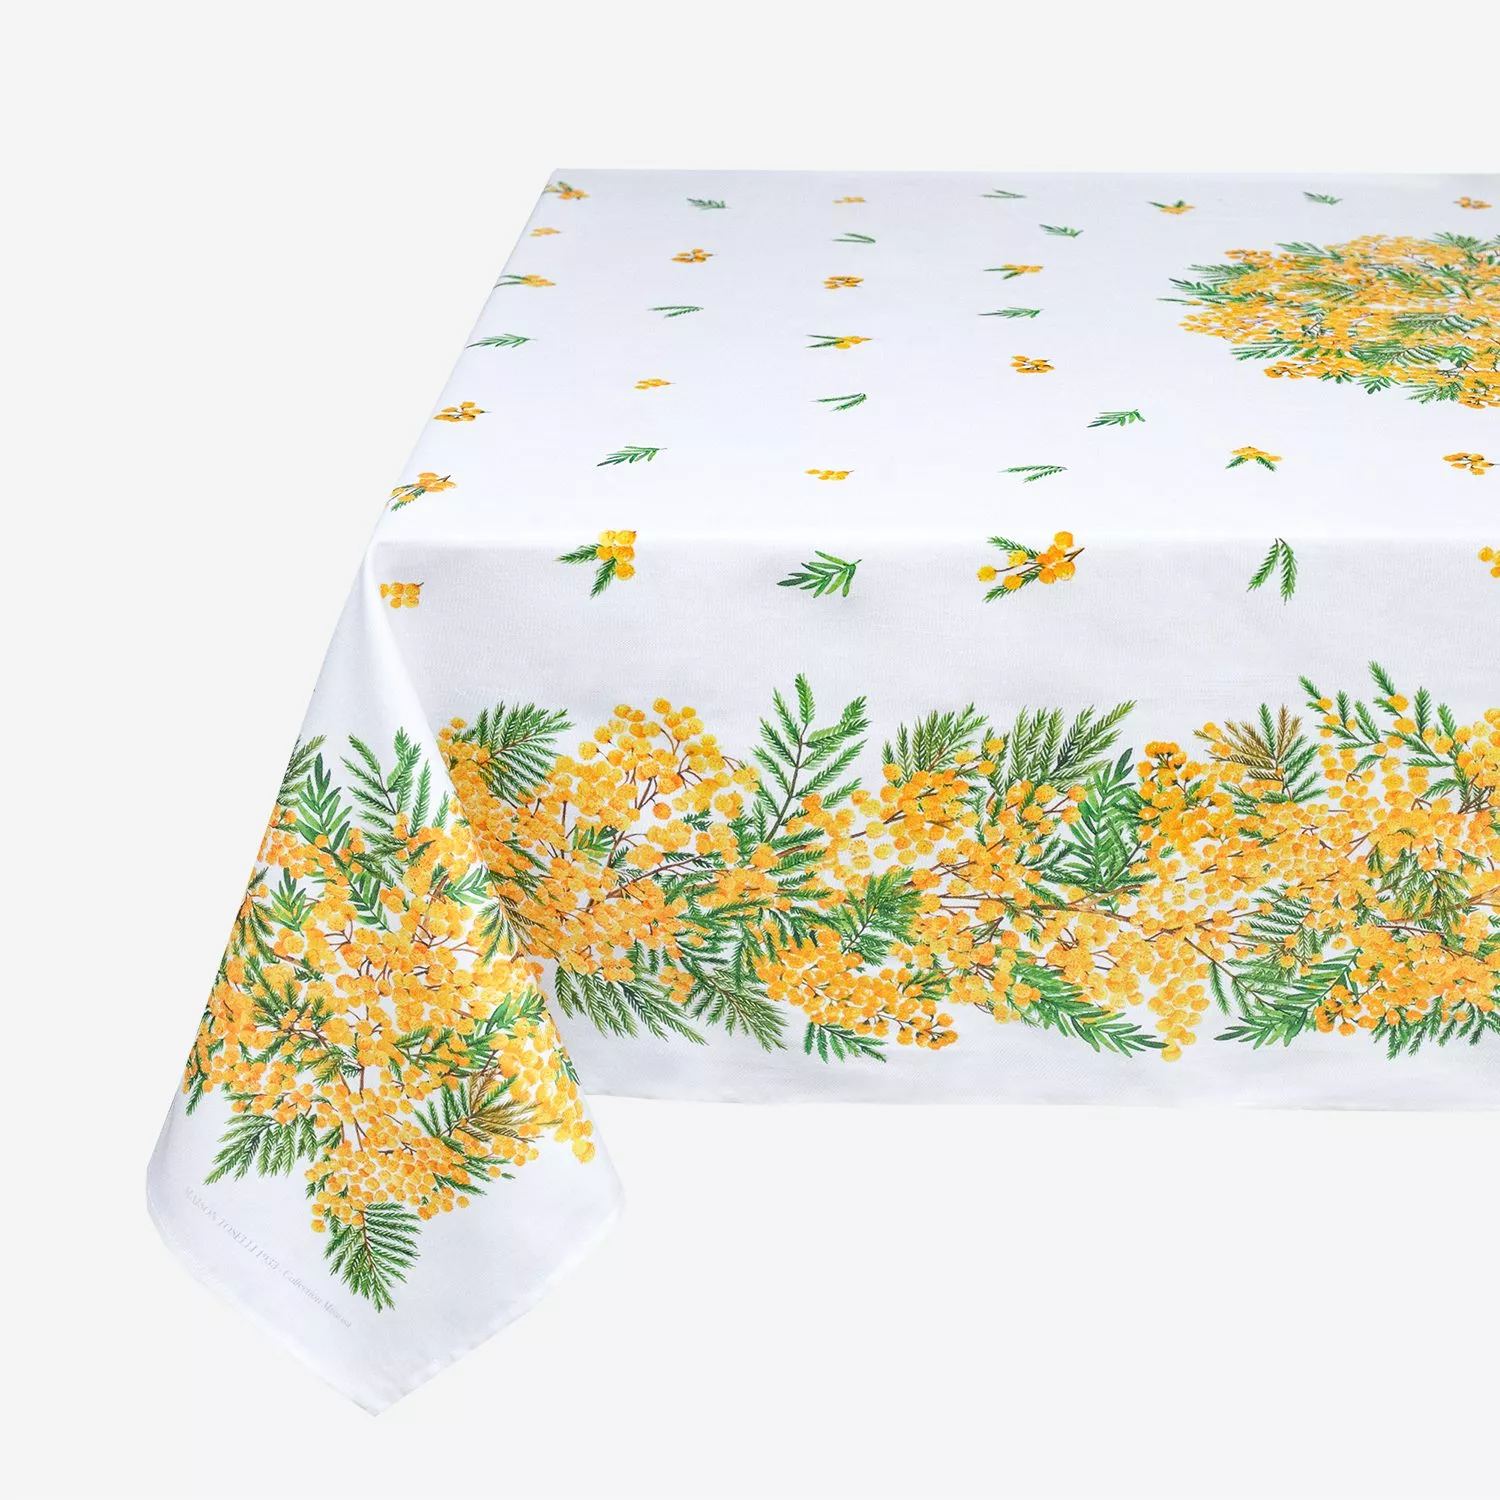 French tablecloth coated or cotton (Mimosa. white)